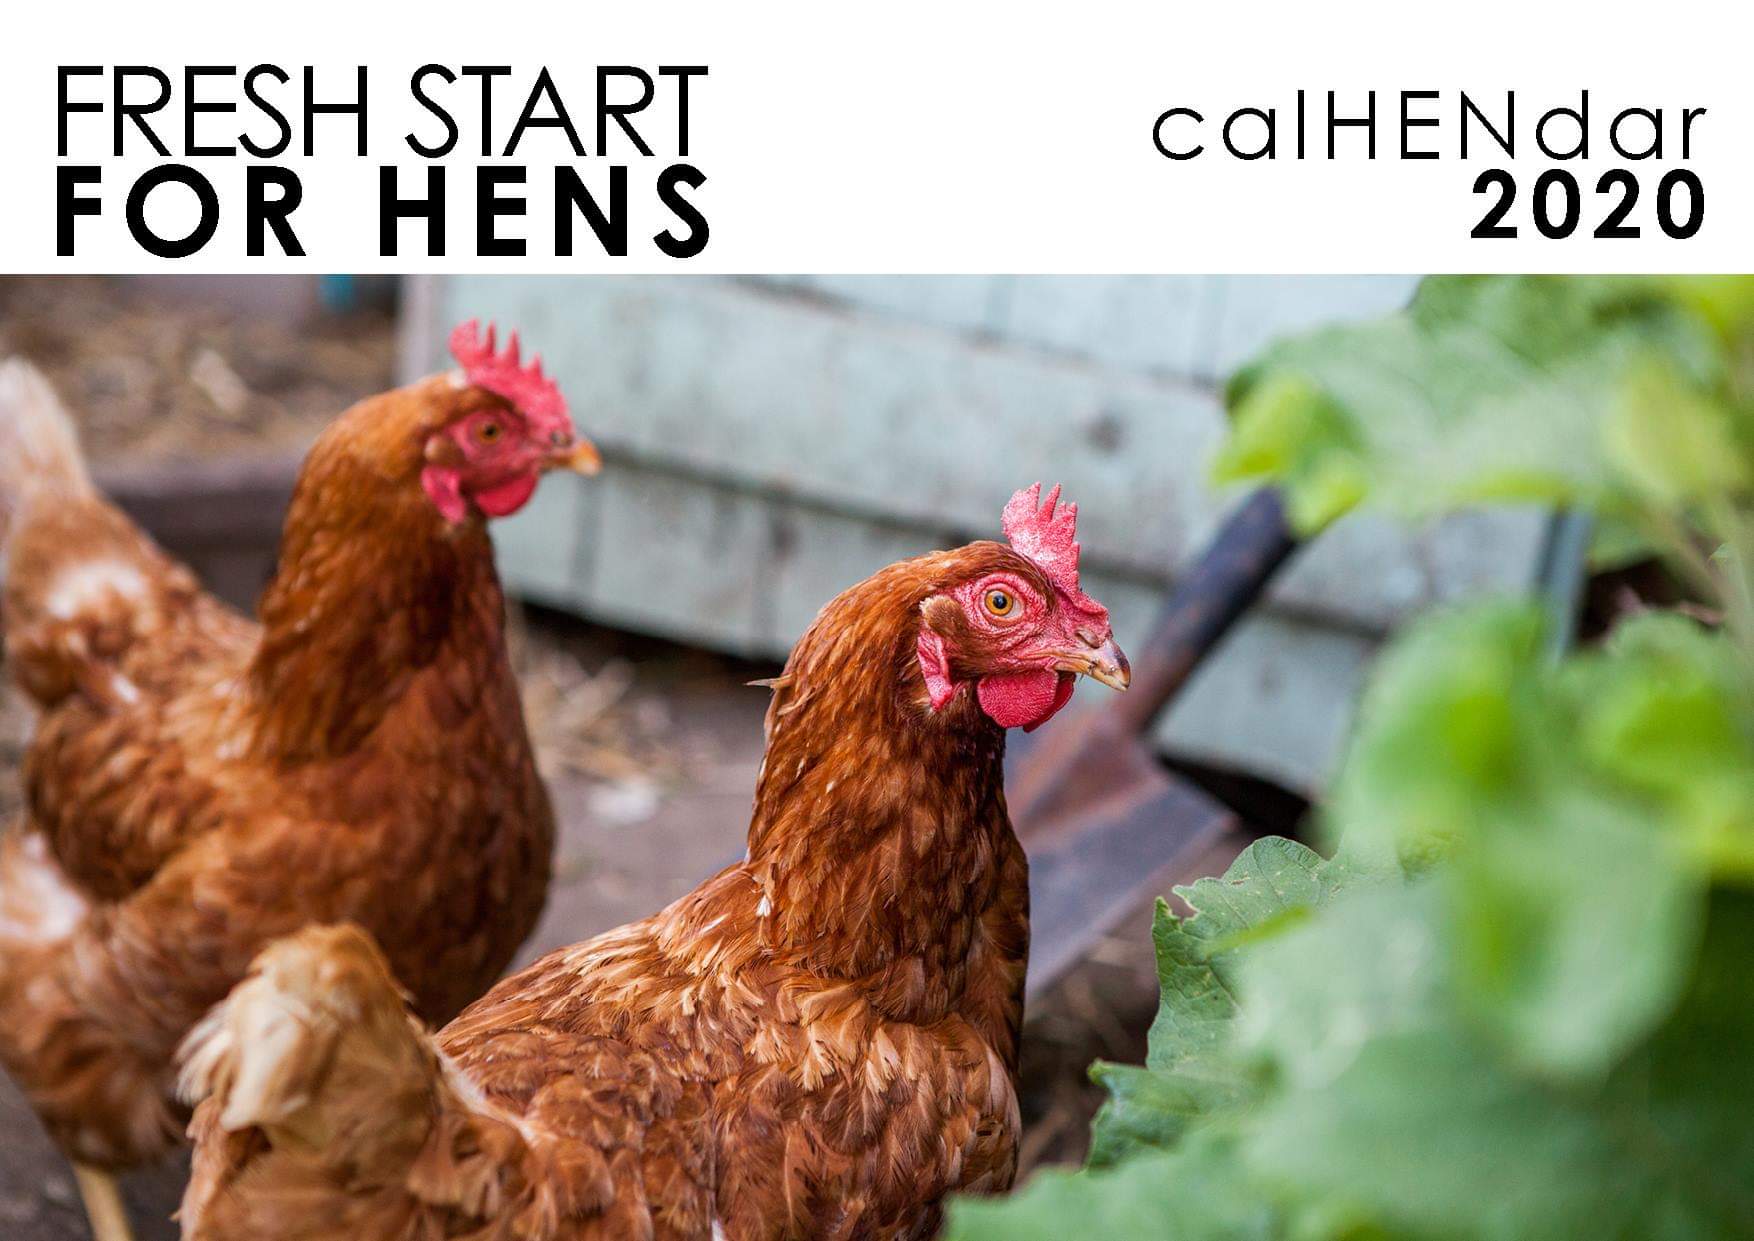 NEWS | Urgent appeal to find a home for hens